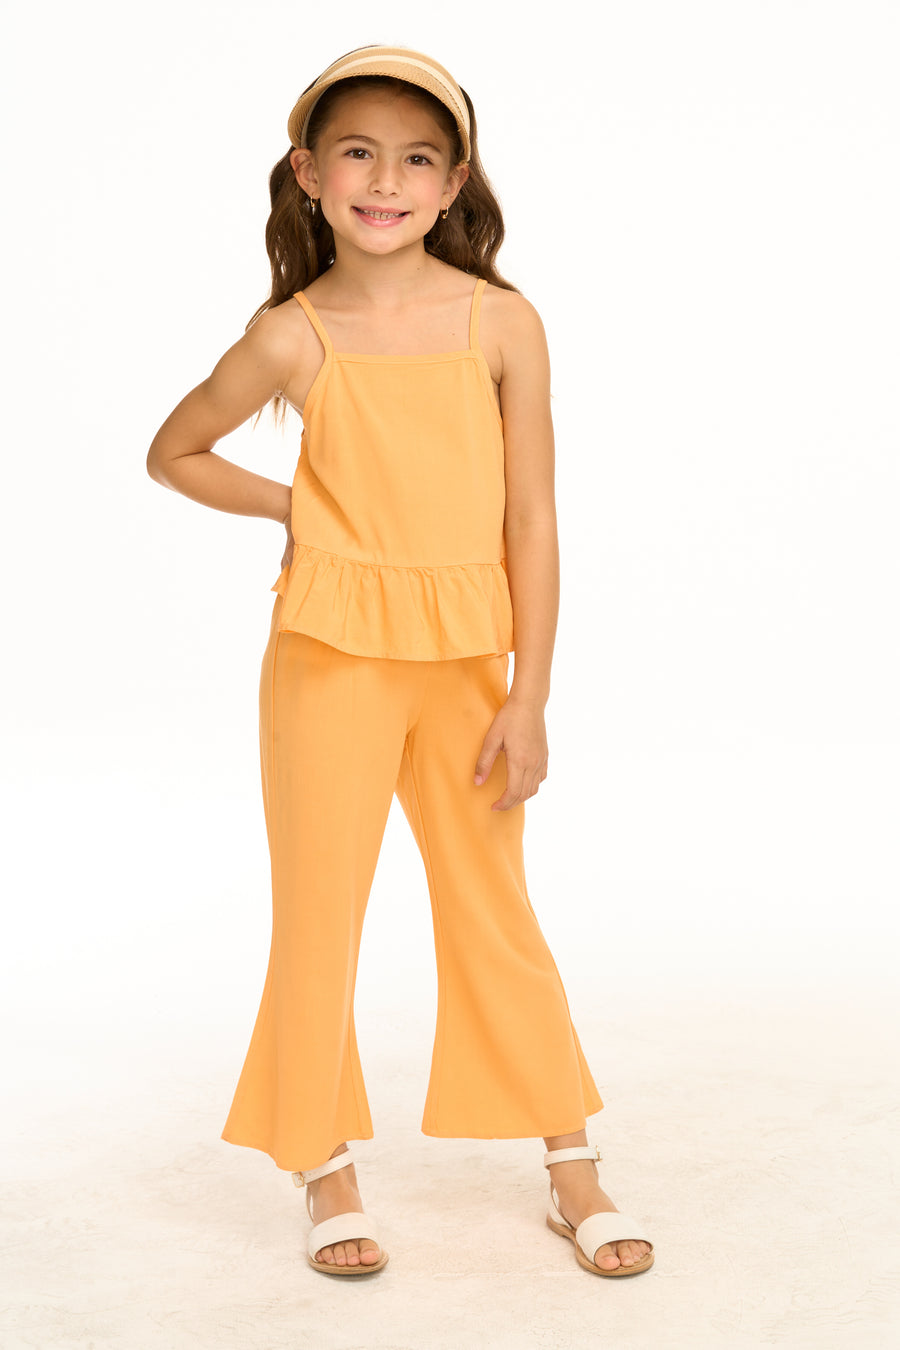 Emma Creamsicle Trousers GIRLS chaserbrand